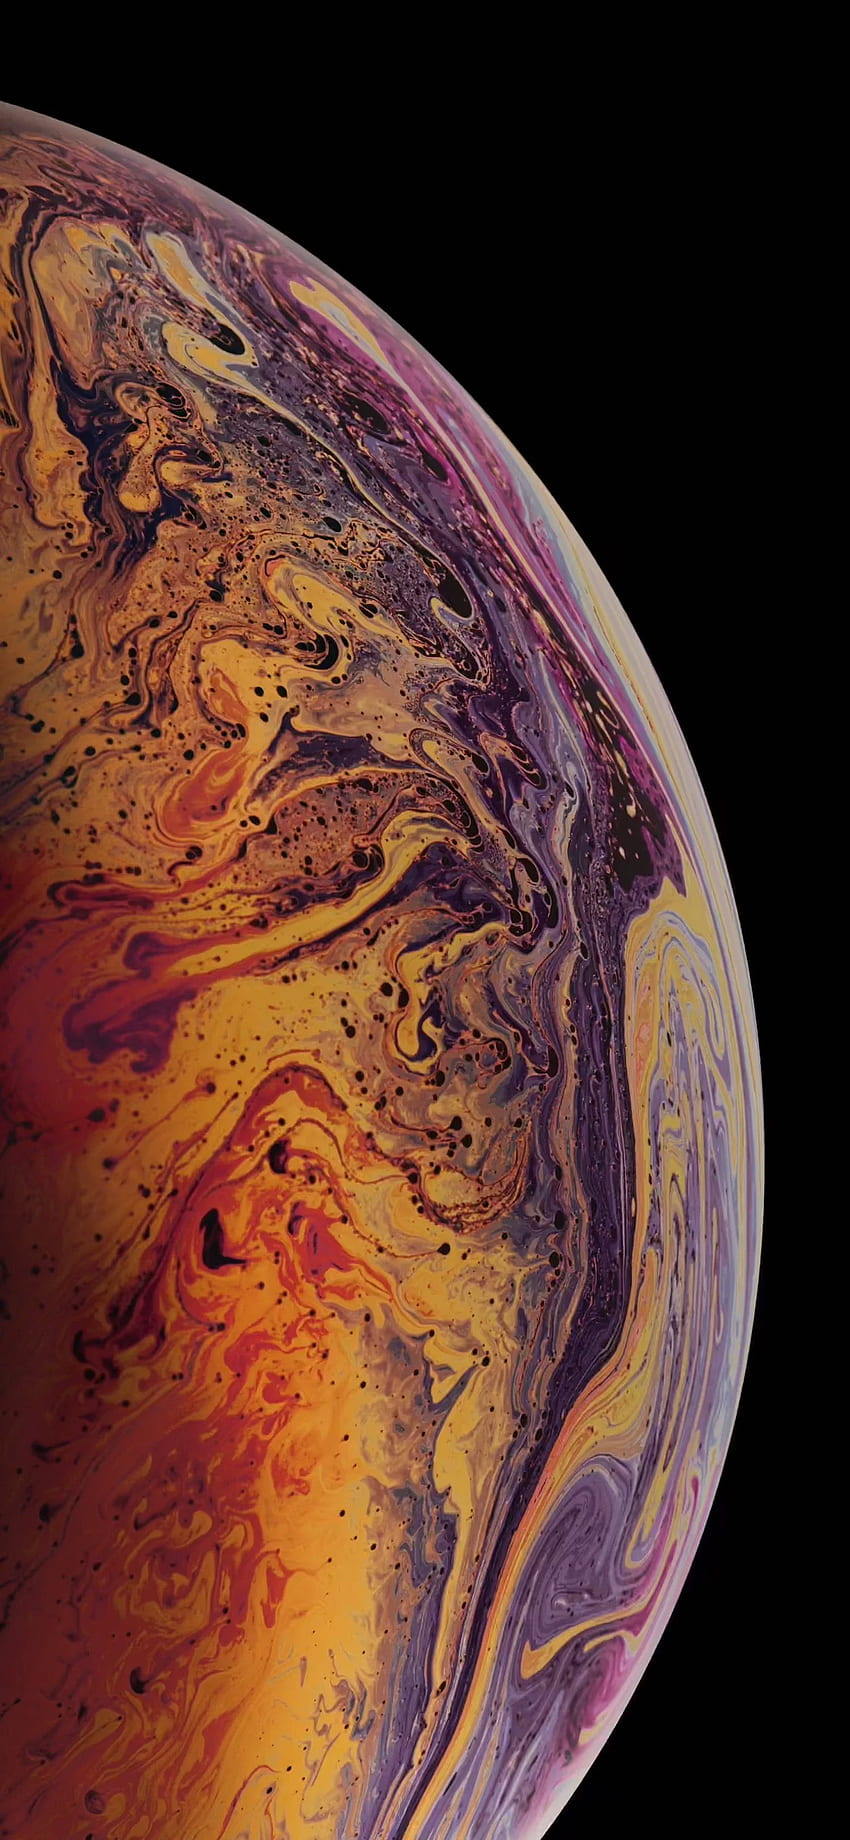 the new iPhone Xs and iPhone Xs Max right here, X Original HD phone wallpaper